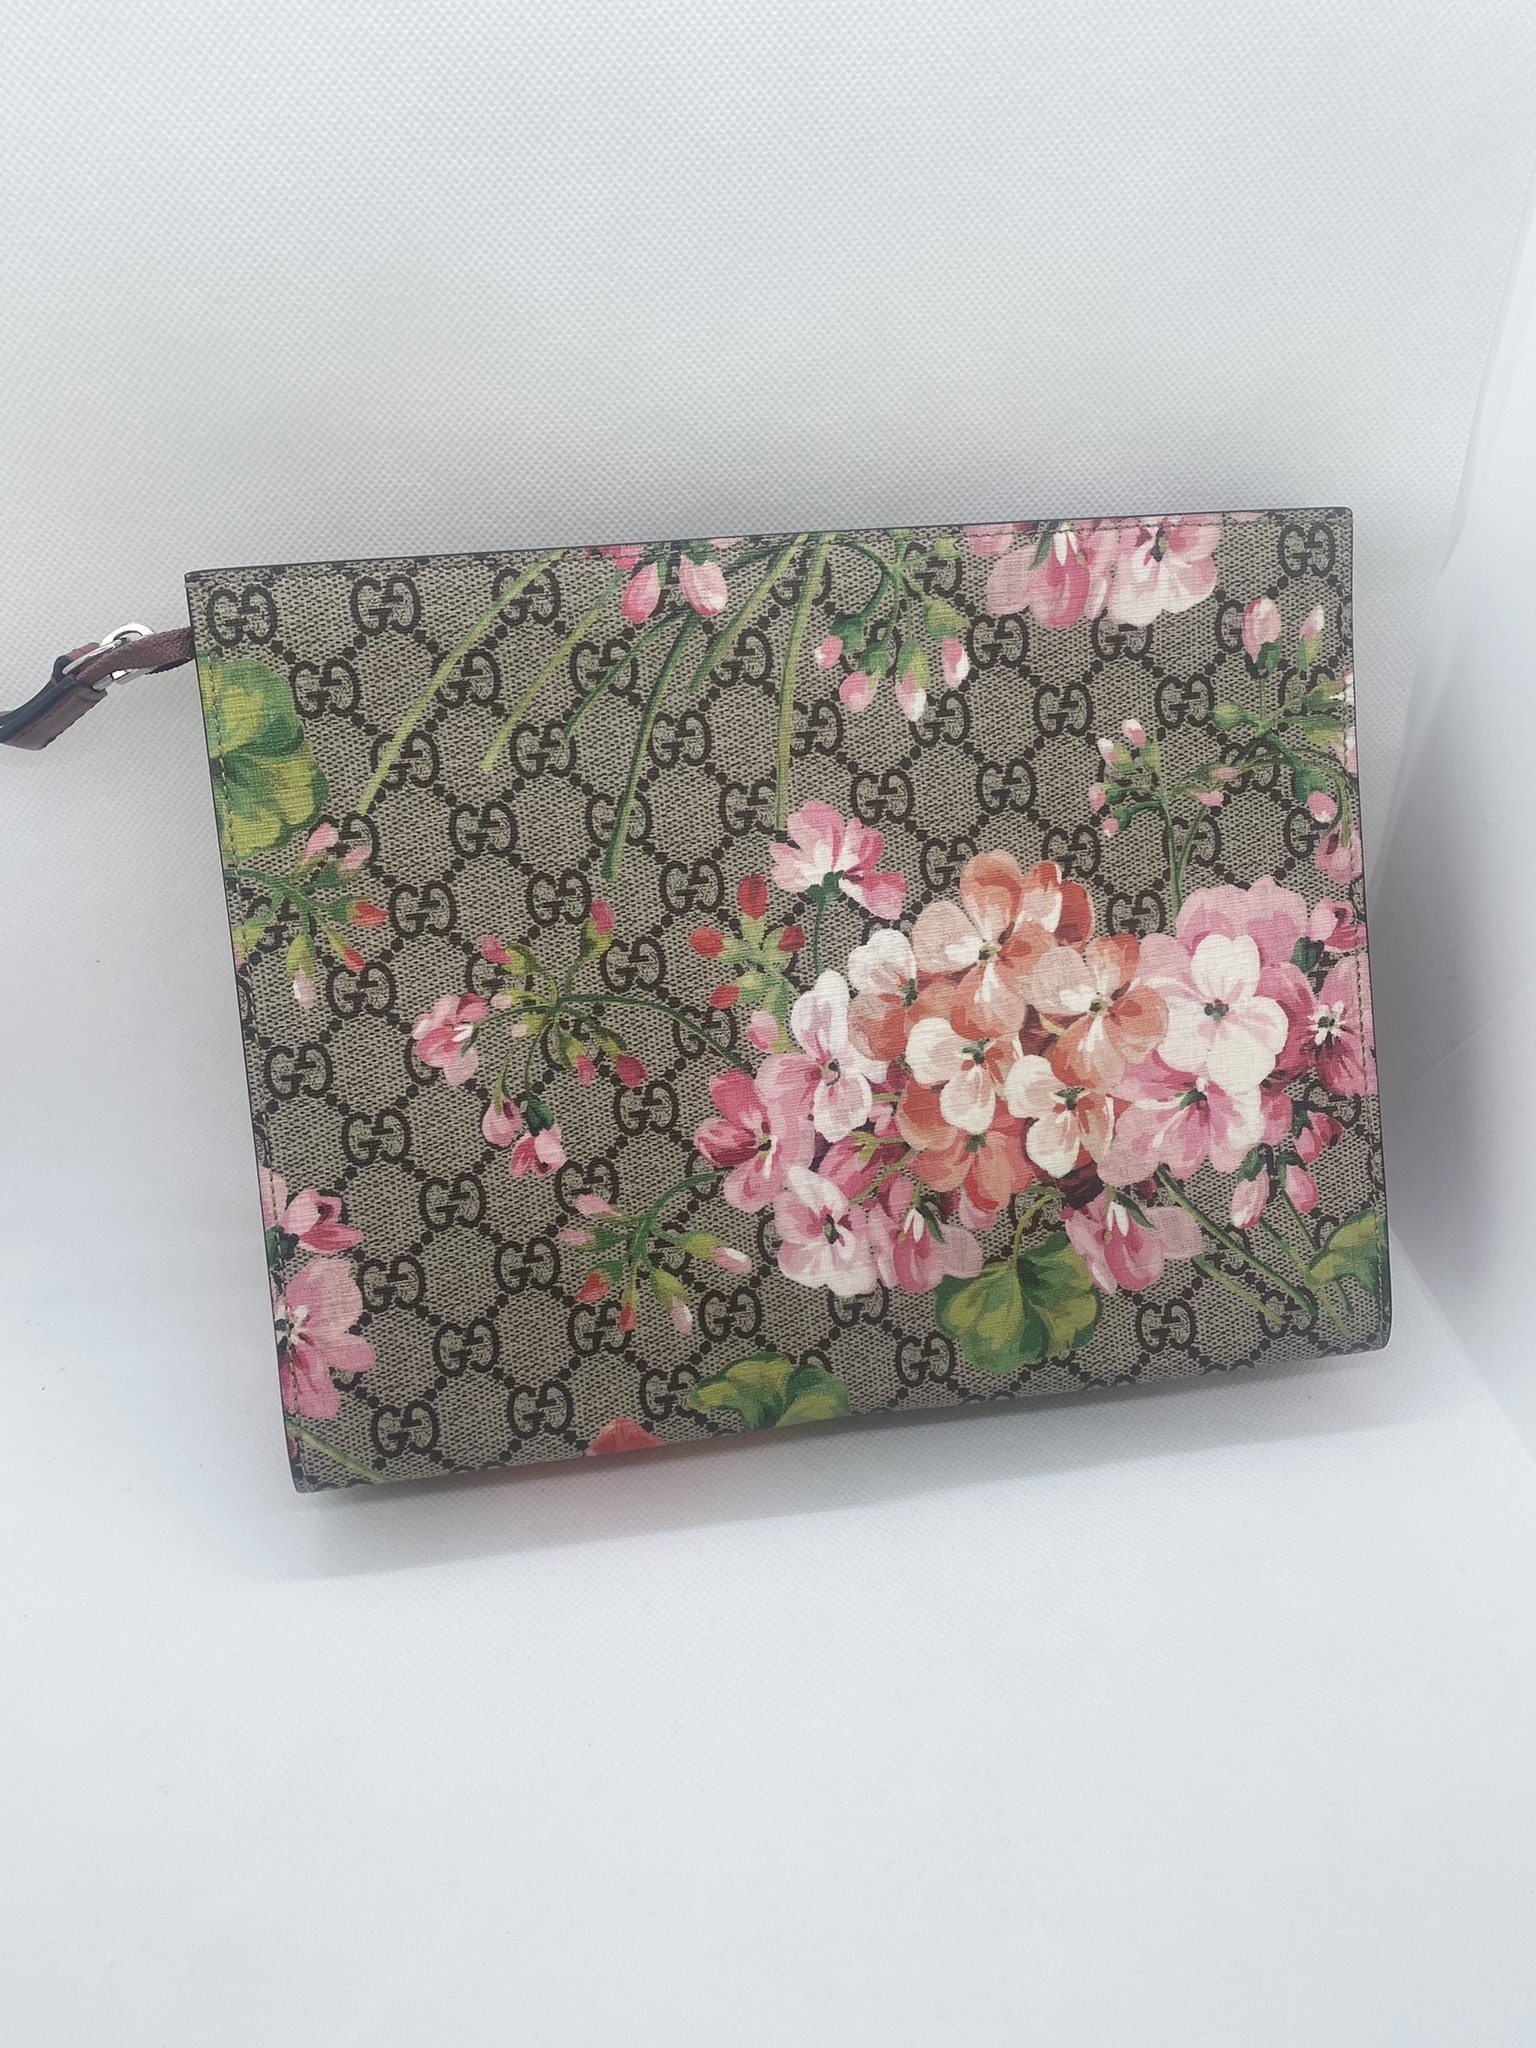 Gucci blooms bloom pouch clutch bag in S60 Rotherham for £400.00 for sale